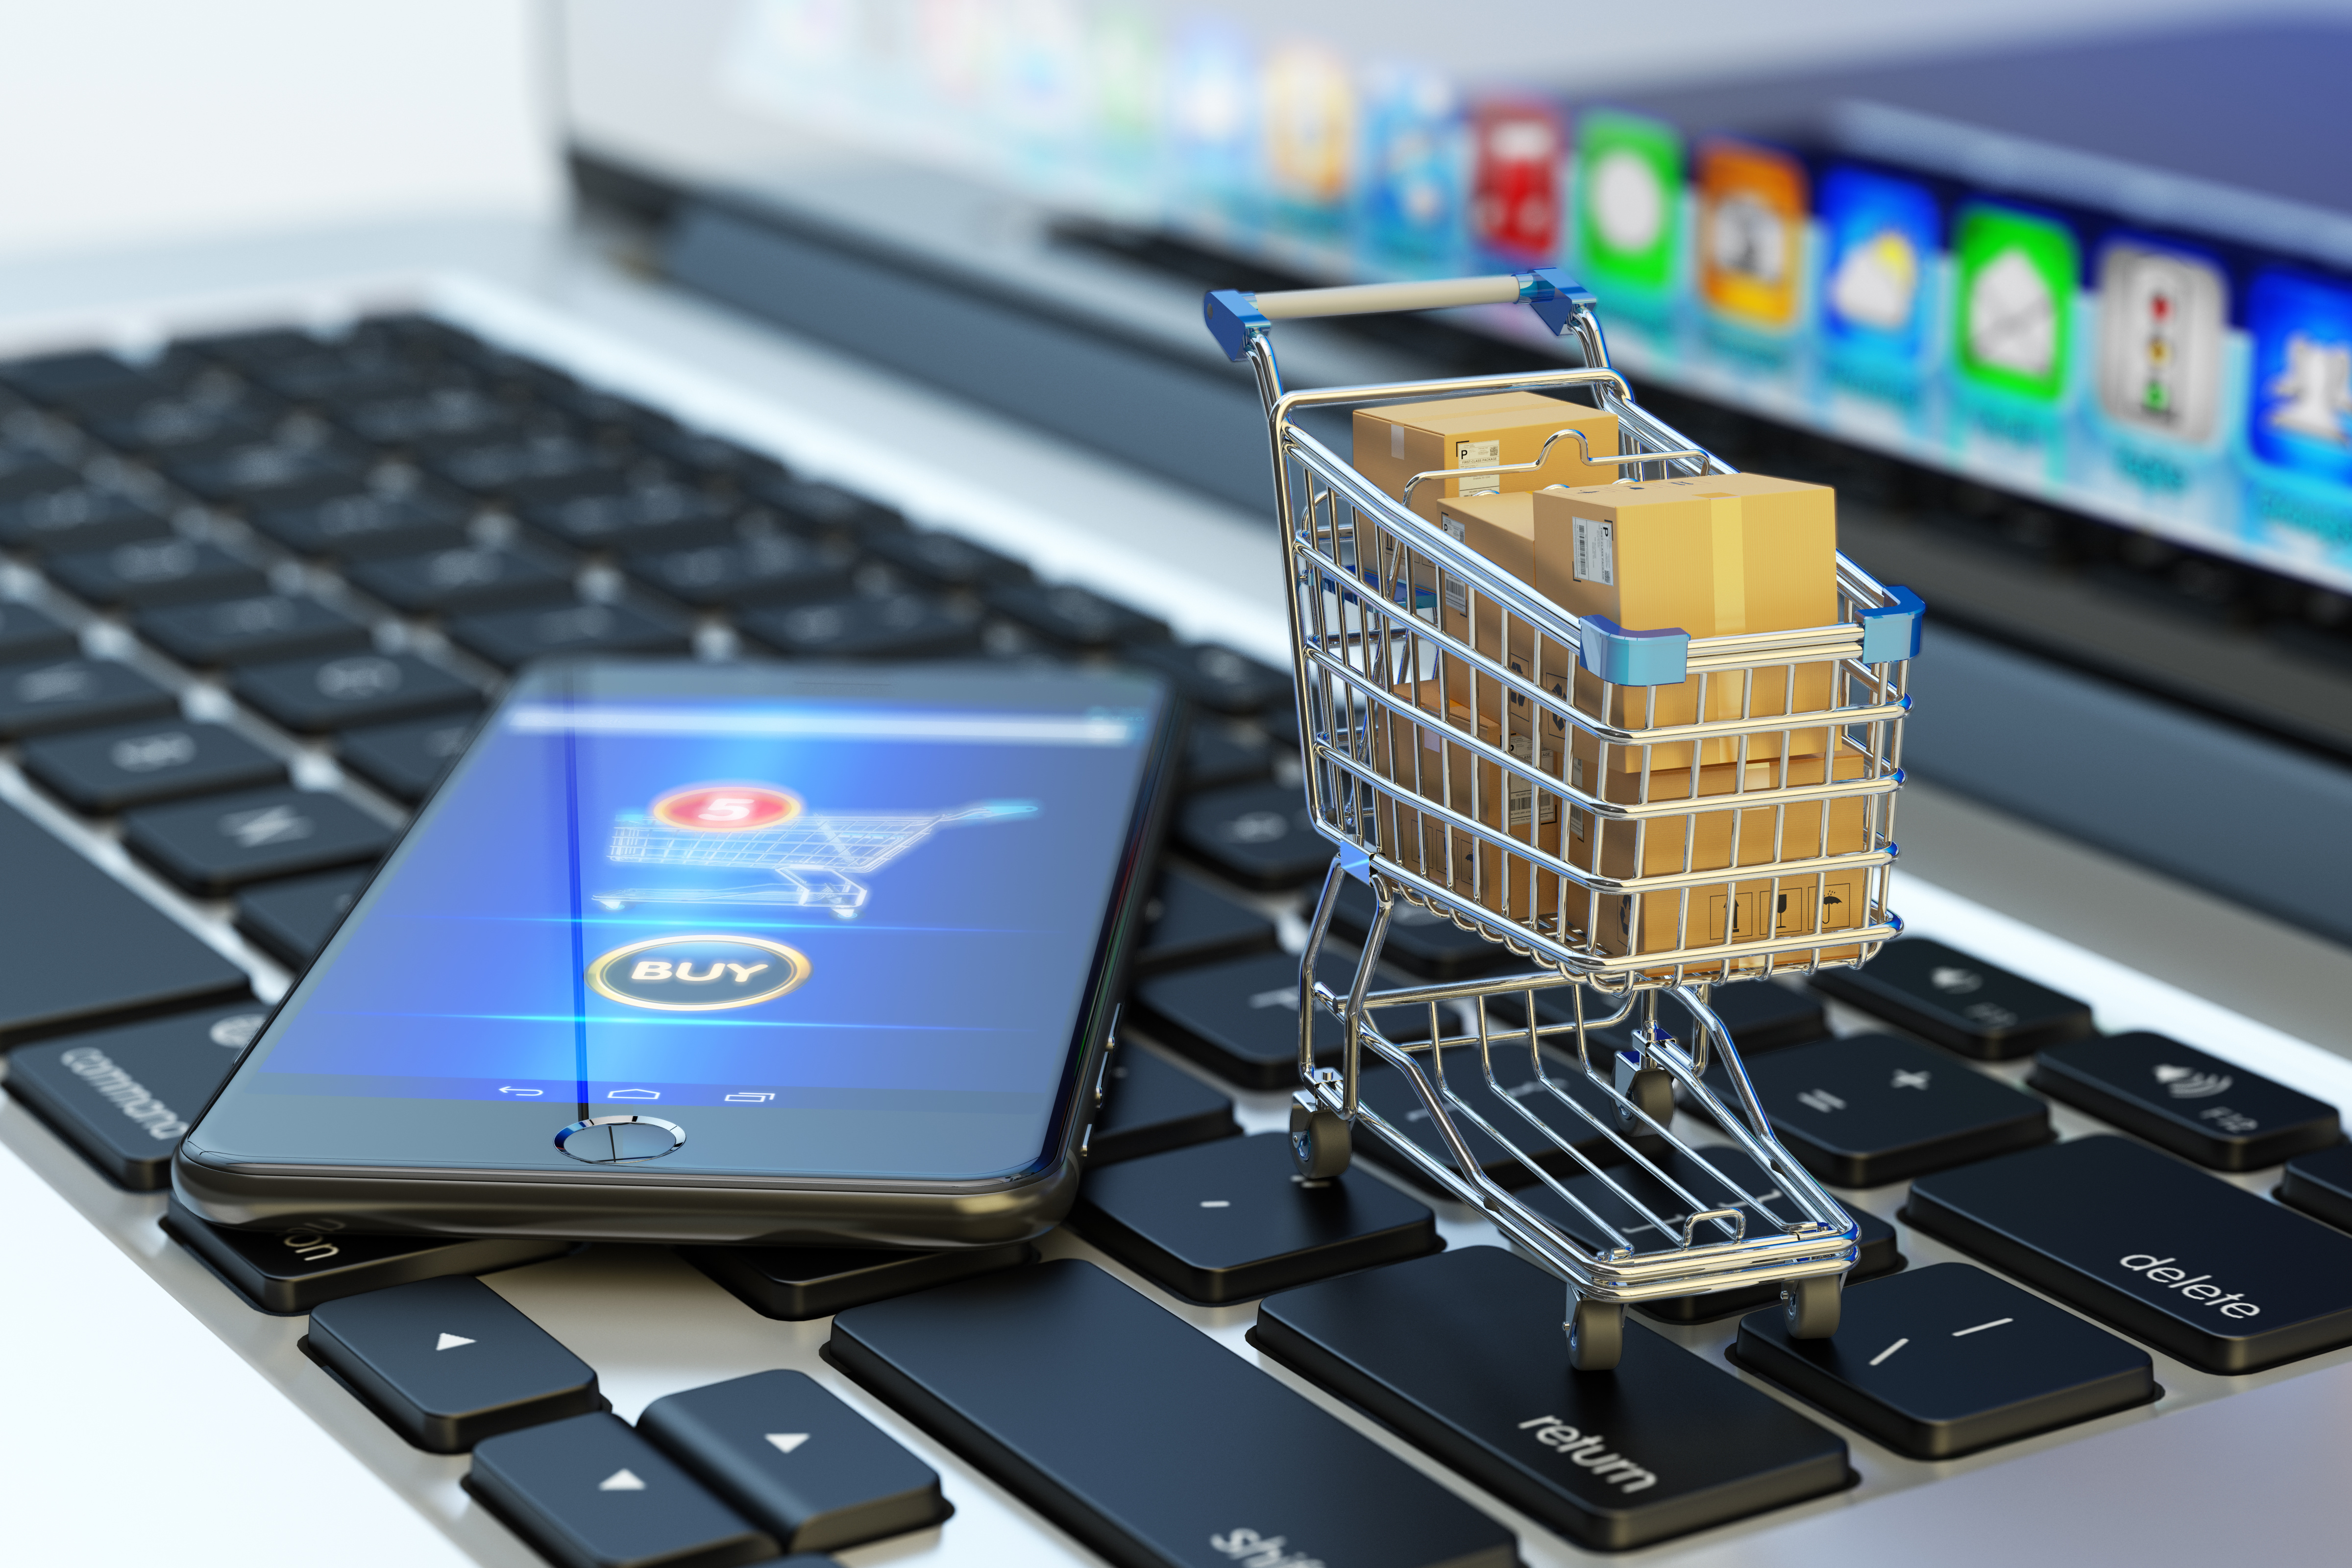 Be cautious and know your rights when shopping online | nidirect